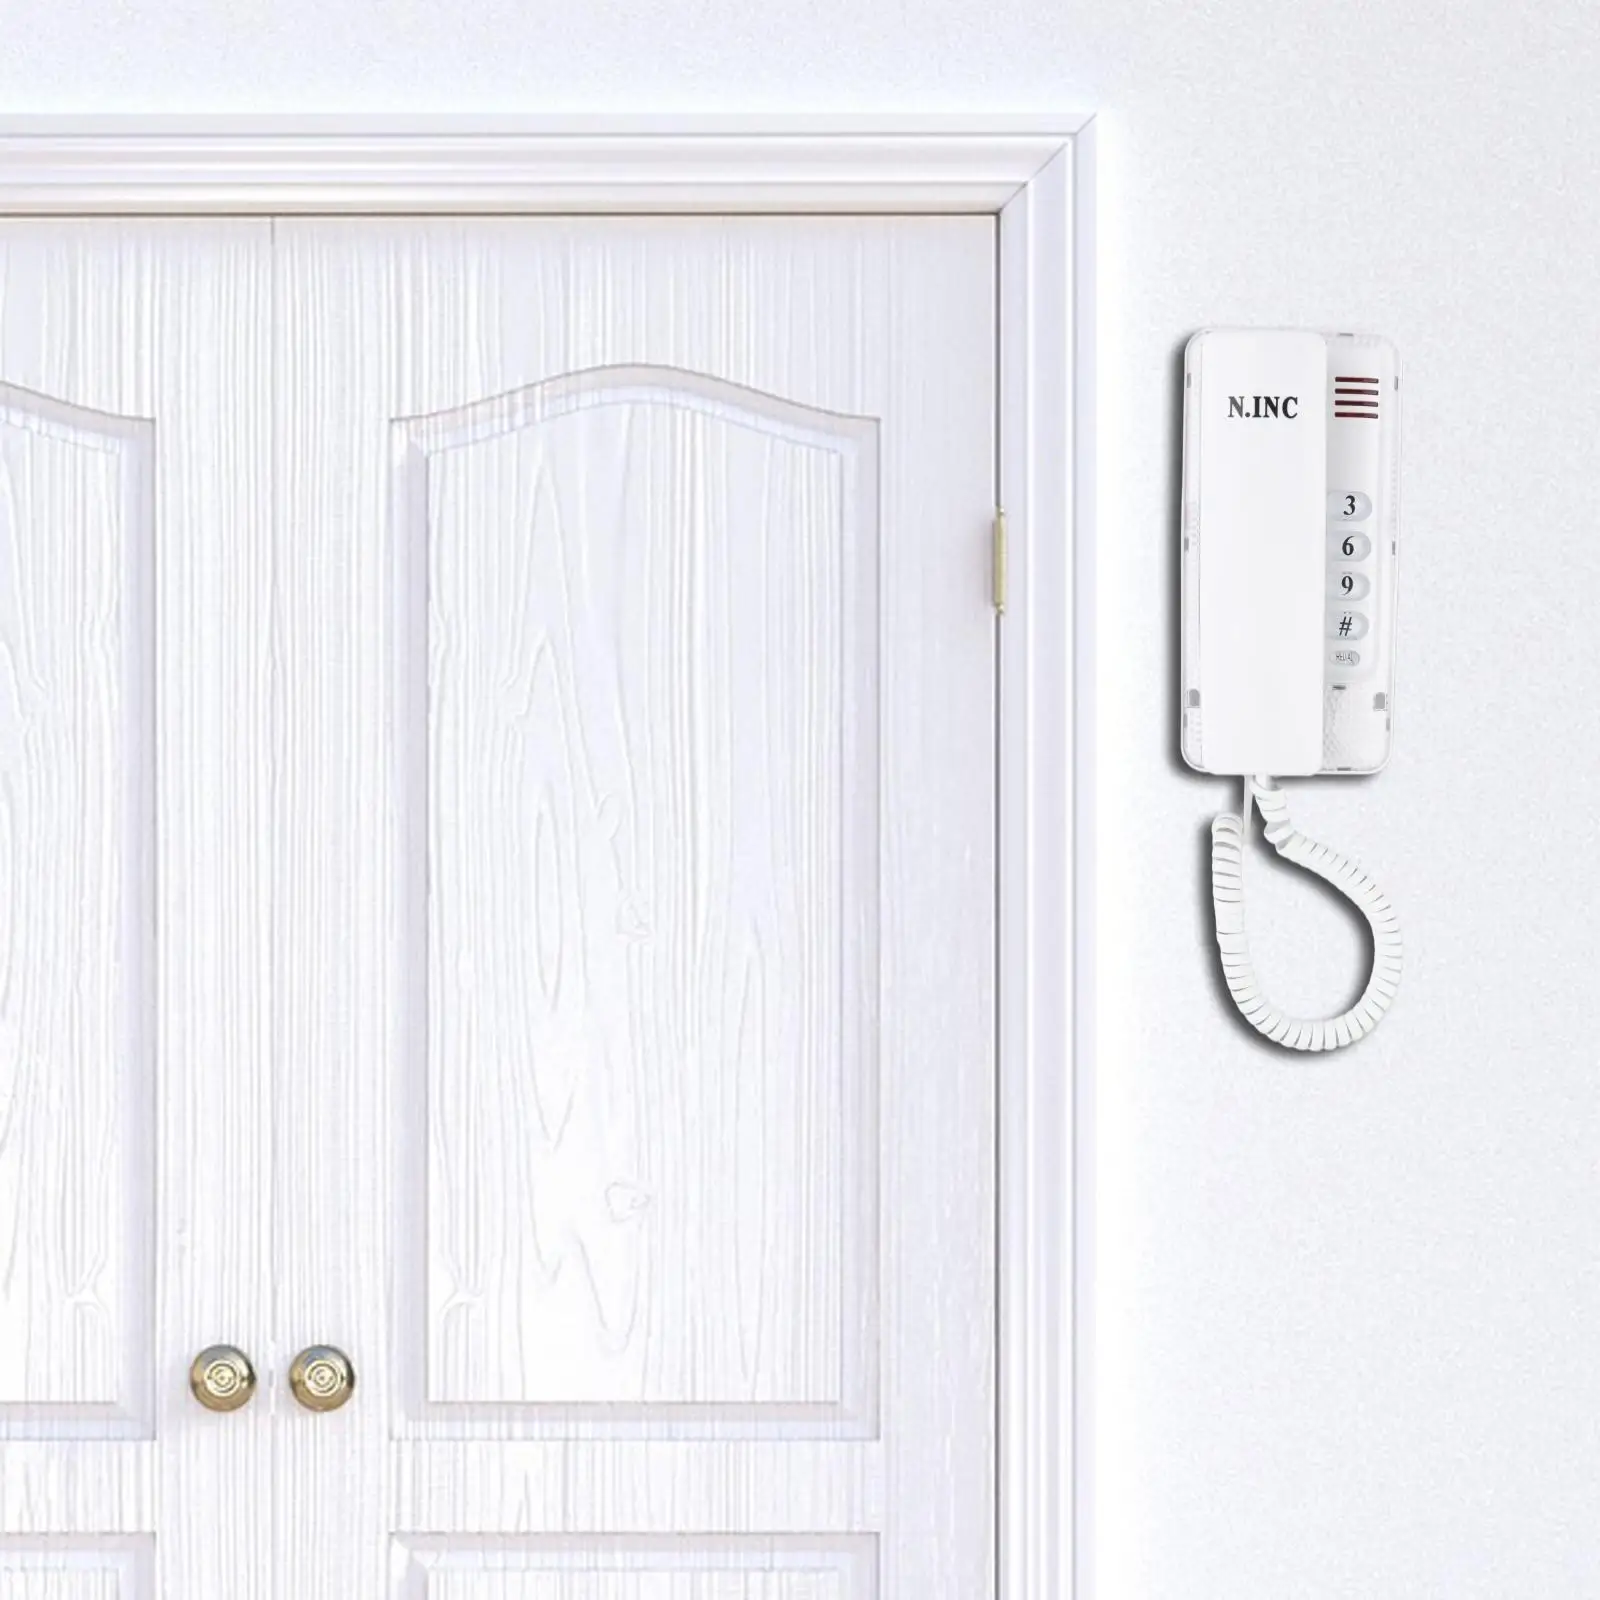 Phone Corded Clear Back Flash Reset Hold for Office Home